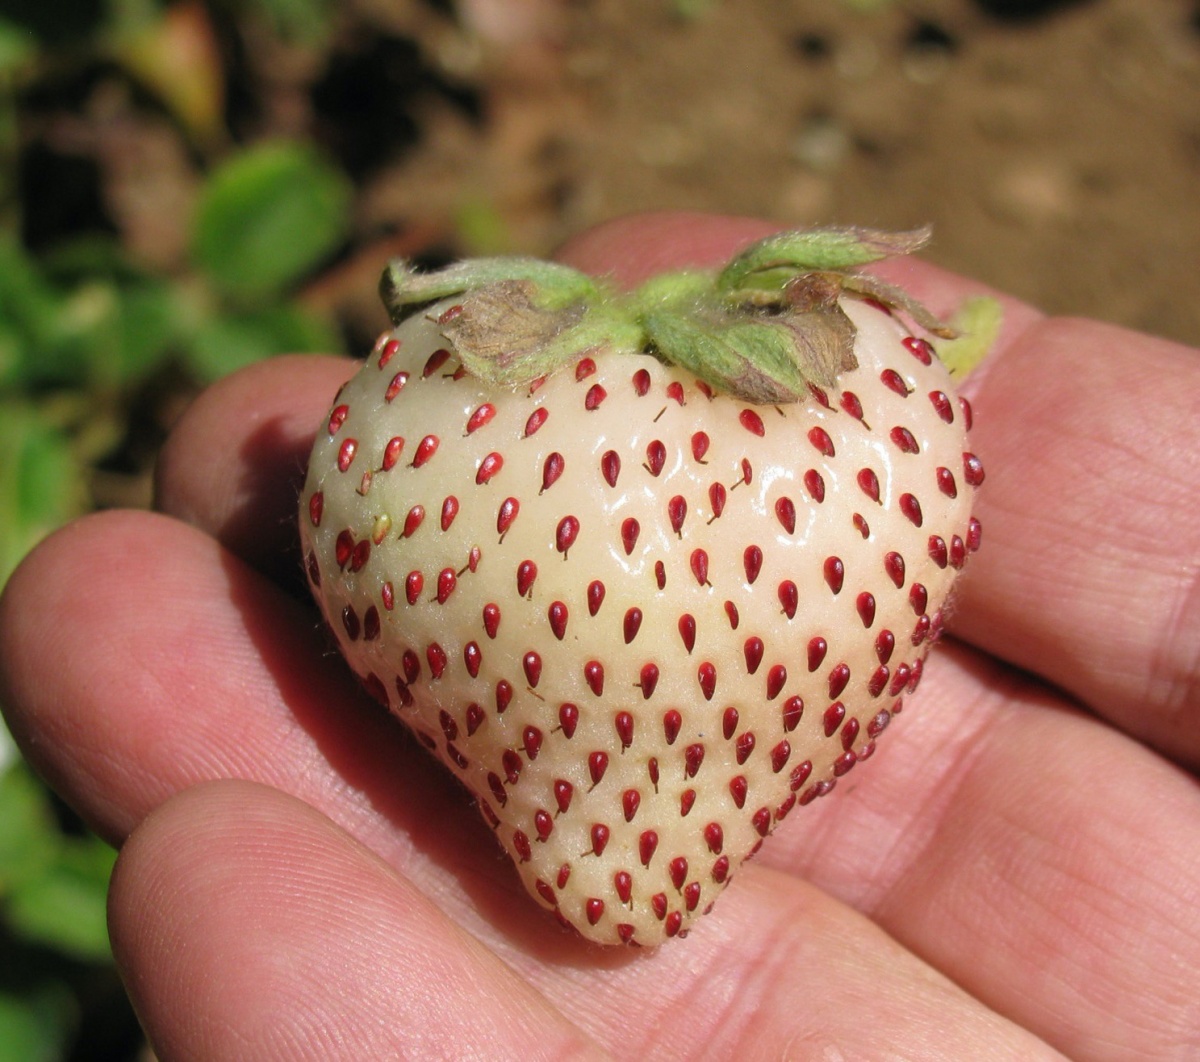 A close up of a white strawberry native to Chile